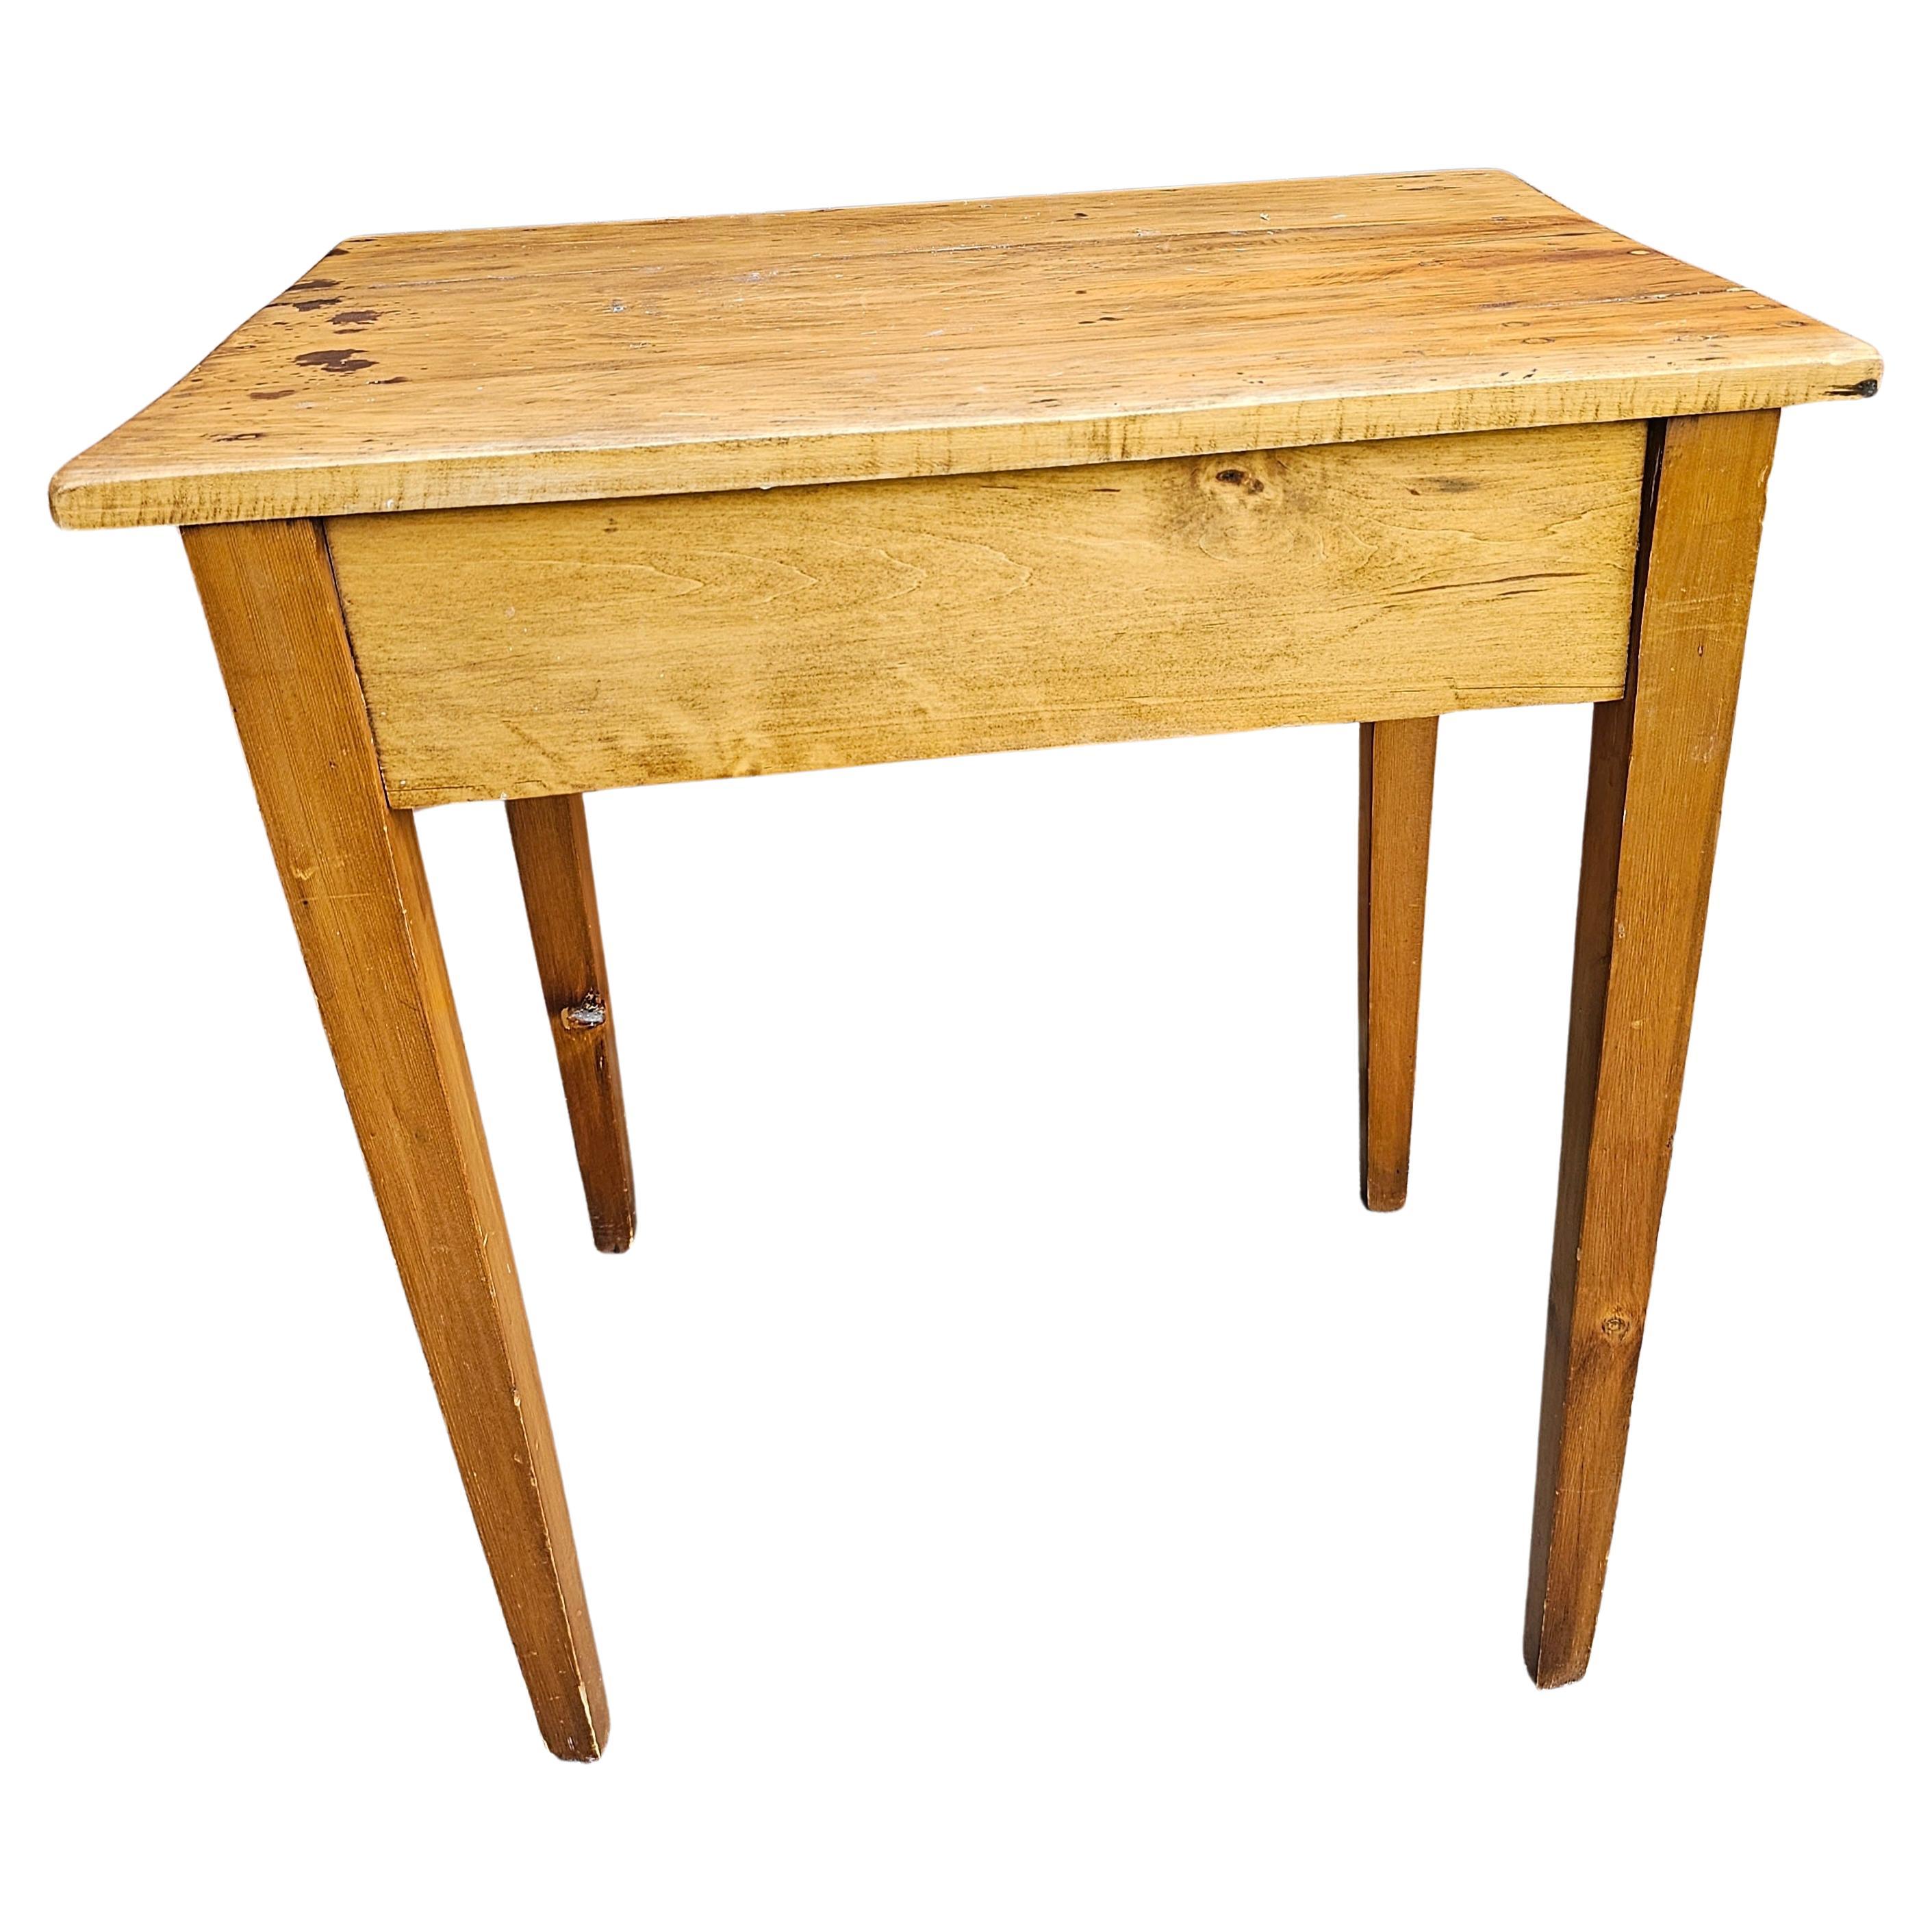 Early American Maple Utility Table, Circa 19th Century For Sale